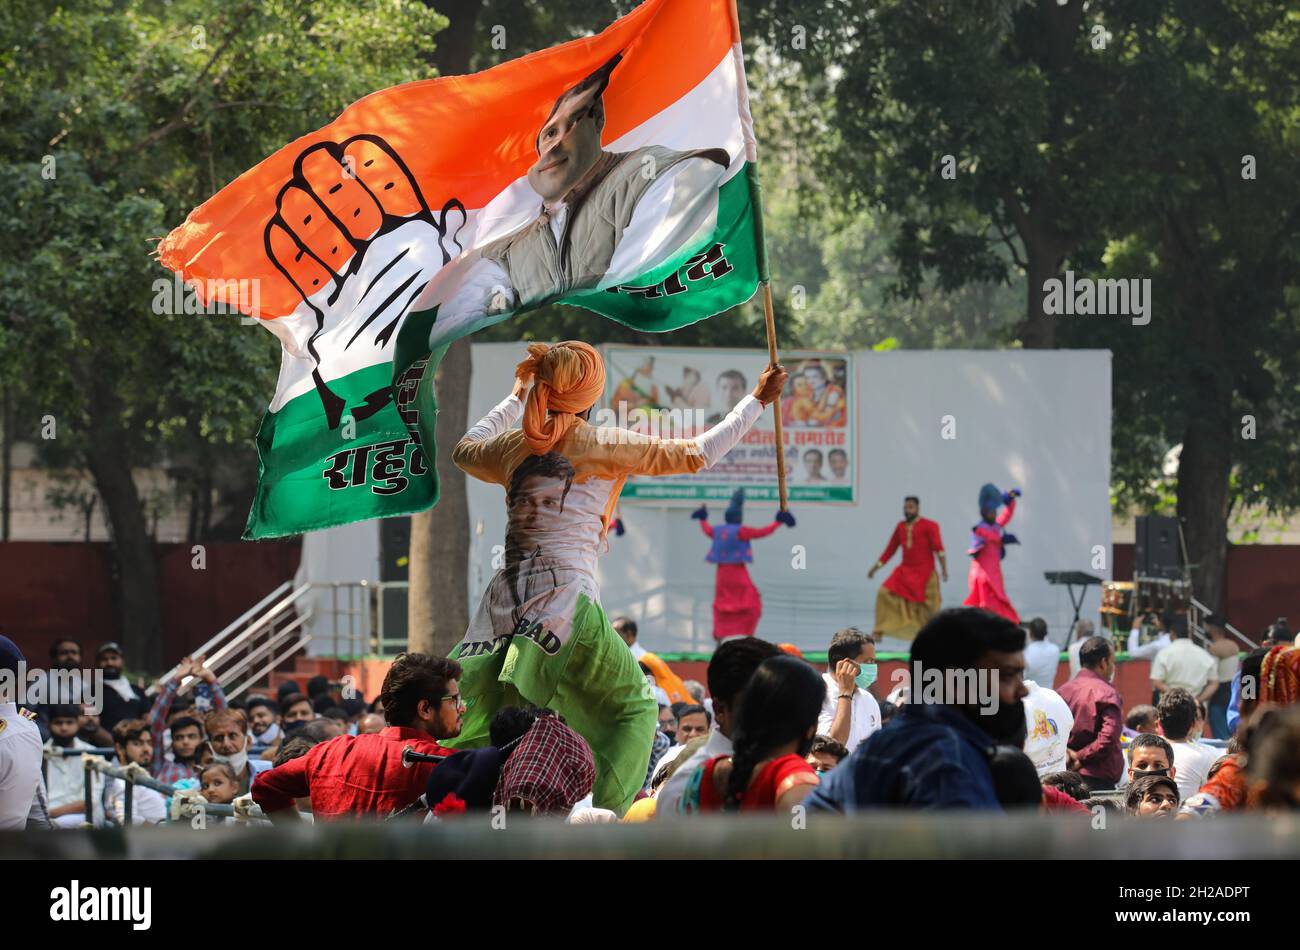 New Delhi, India. 20th Oct, 2021. A supporter unfurled the Congress leader Rahul Gandhi during the flag-off ceremony of Shobha Yatra on the occasion of Maharishi Valmiki Jayanti, at All India Congress Committee headquarter. Valmiki Jayanti, is an annual Indian festival celebrated in particular by the Balmiki religious group, to commemorate the birth of the ancient Indian poet and philosopher Valmiki. (Photo by Naveen Sharma/SOPA Images/Sipa USA) Credit: Sipa USA/Alamy Live News Stock Photo